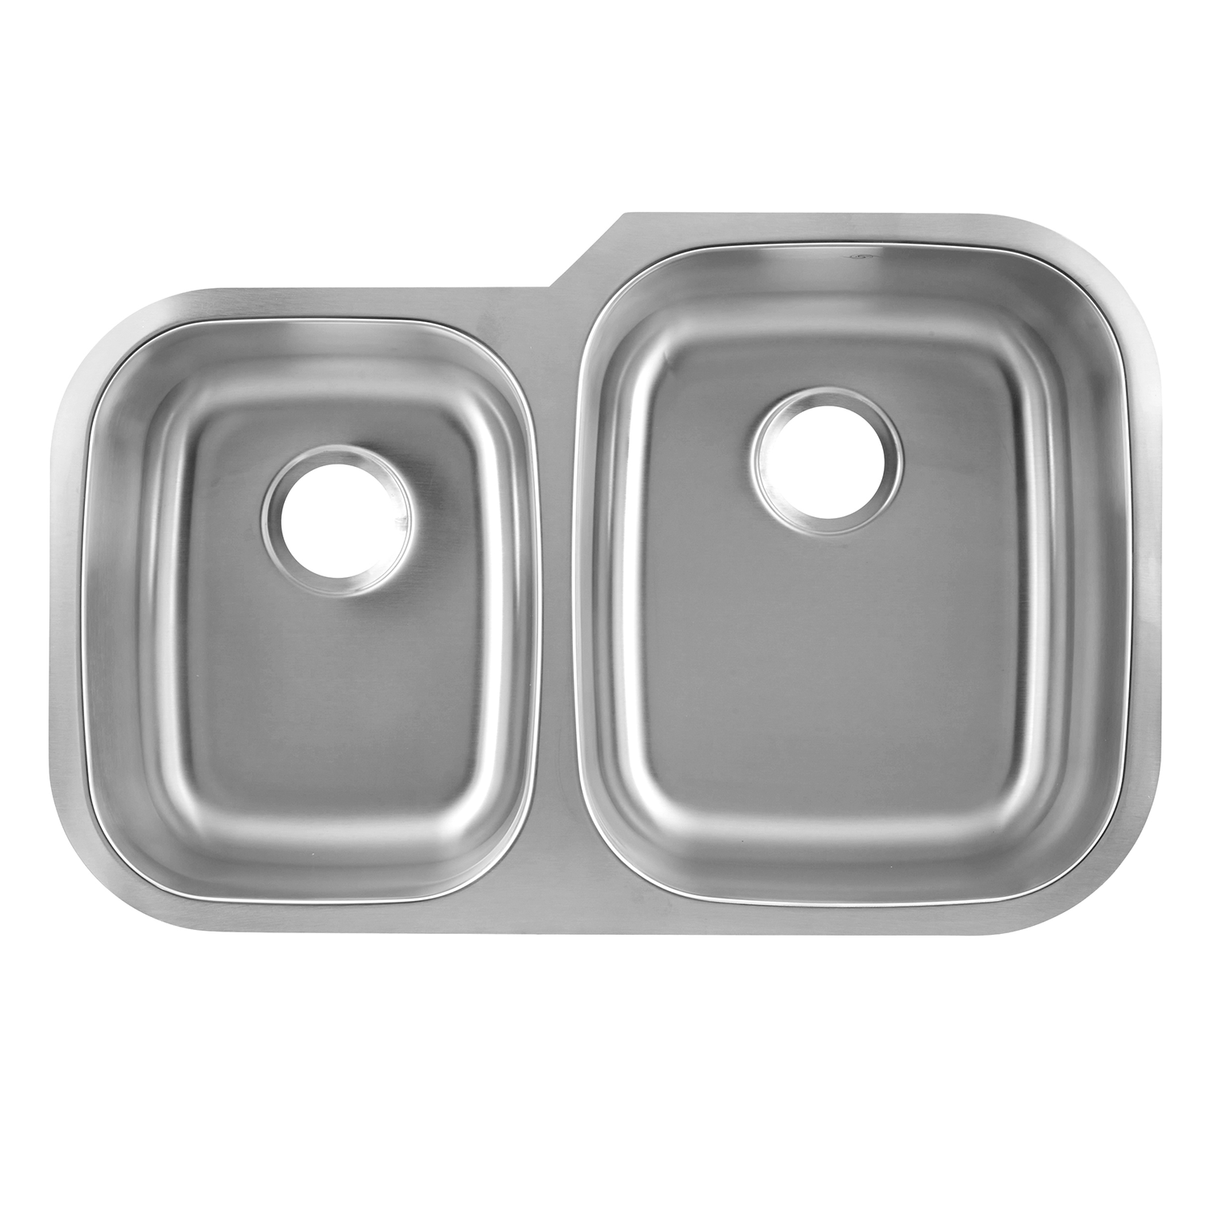 DAX Stainless Steel 40/60 Double Bowl Undermount Kitchen Sink, Brushed Stainless Steel DAX-3120R